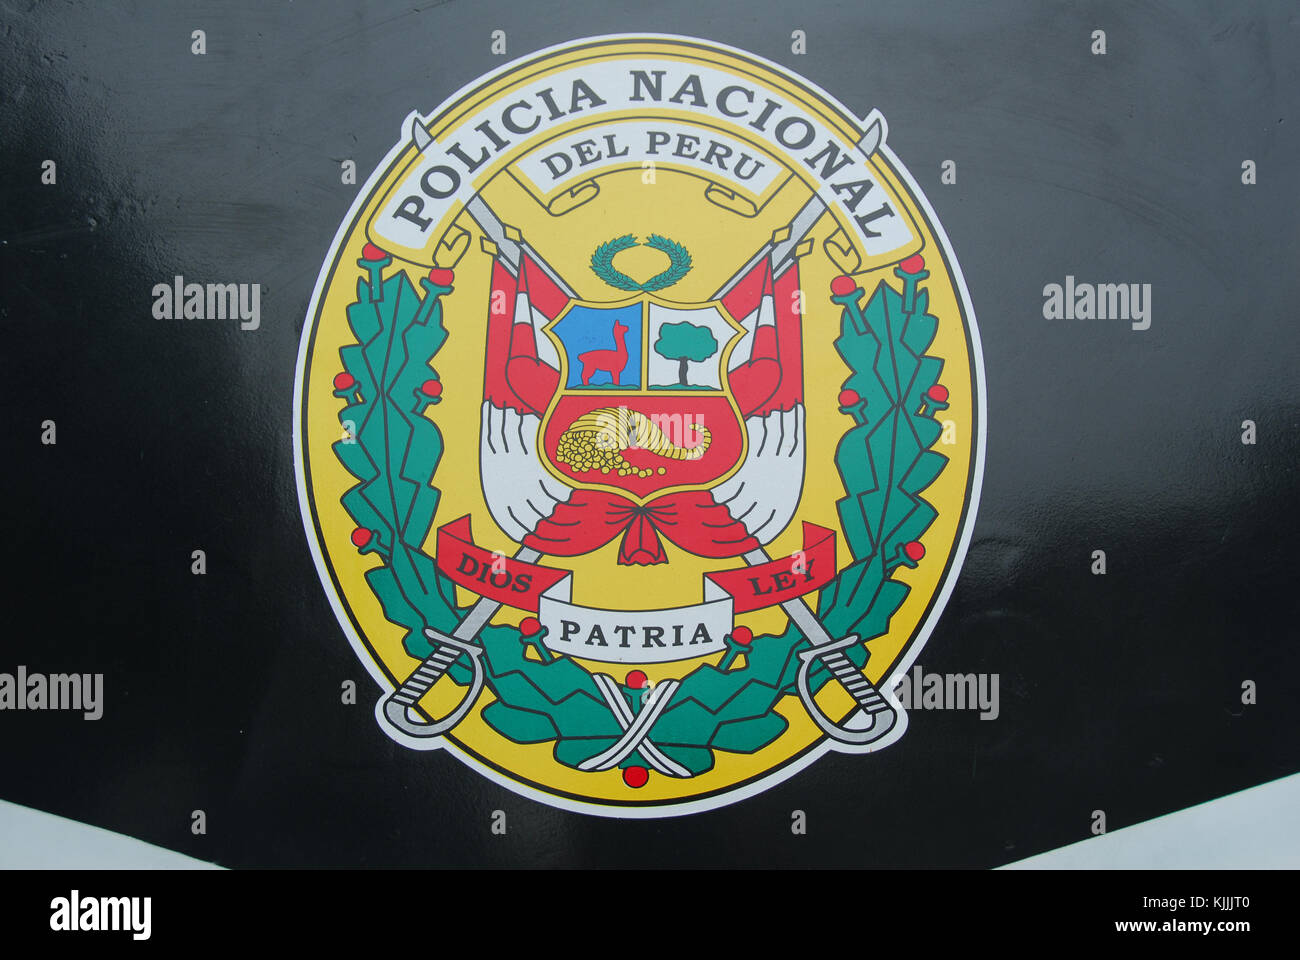 LIMA, PERU - AUGUST 21, 2006: The symbol of the National Police of Peru. Stock Photo